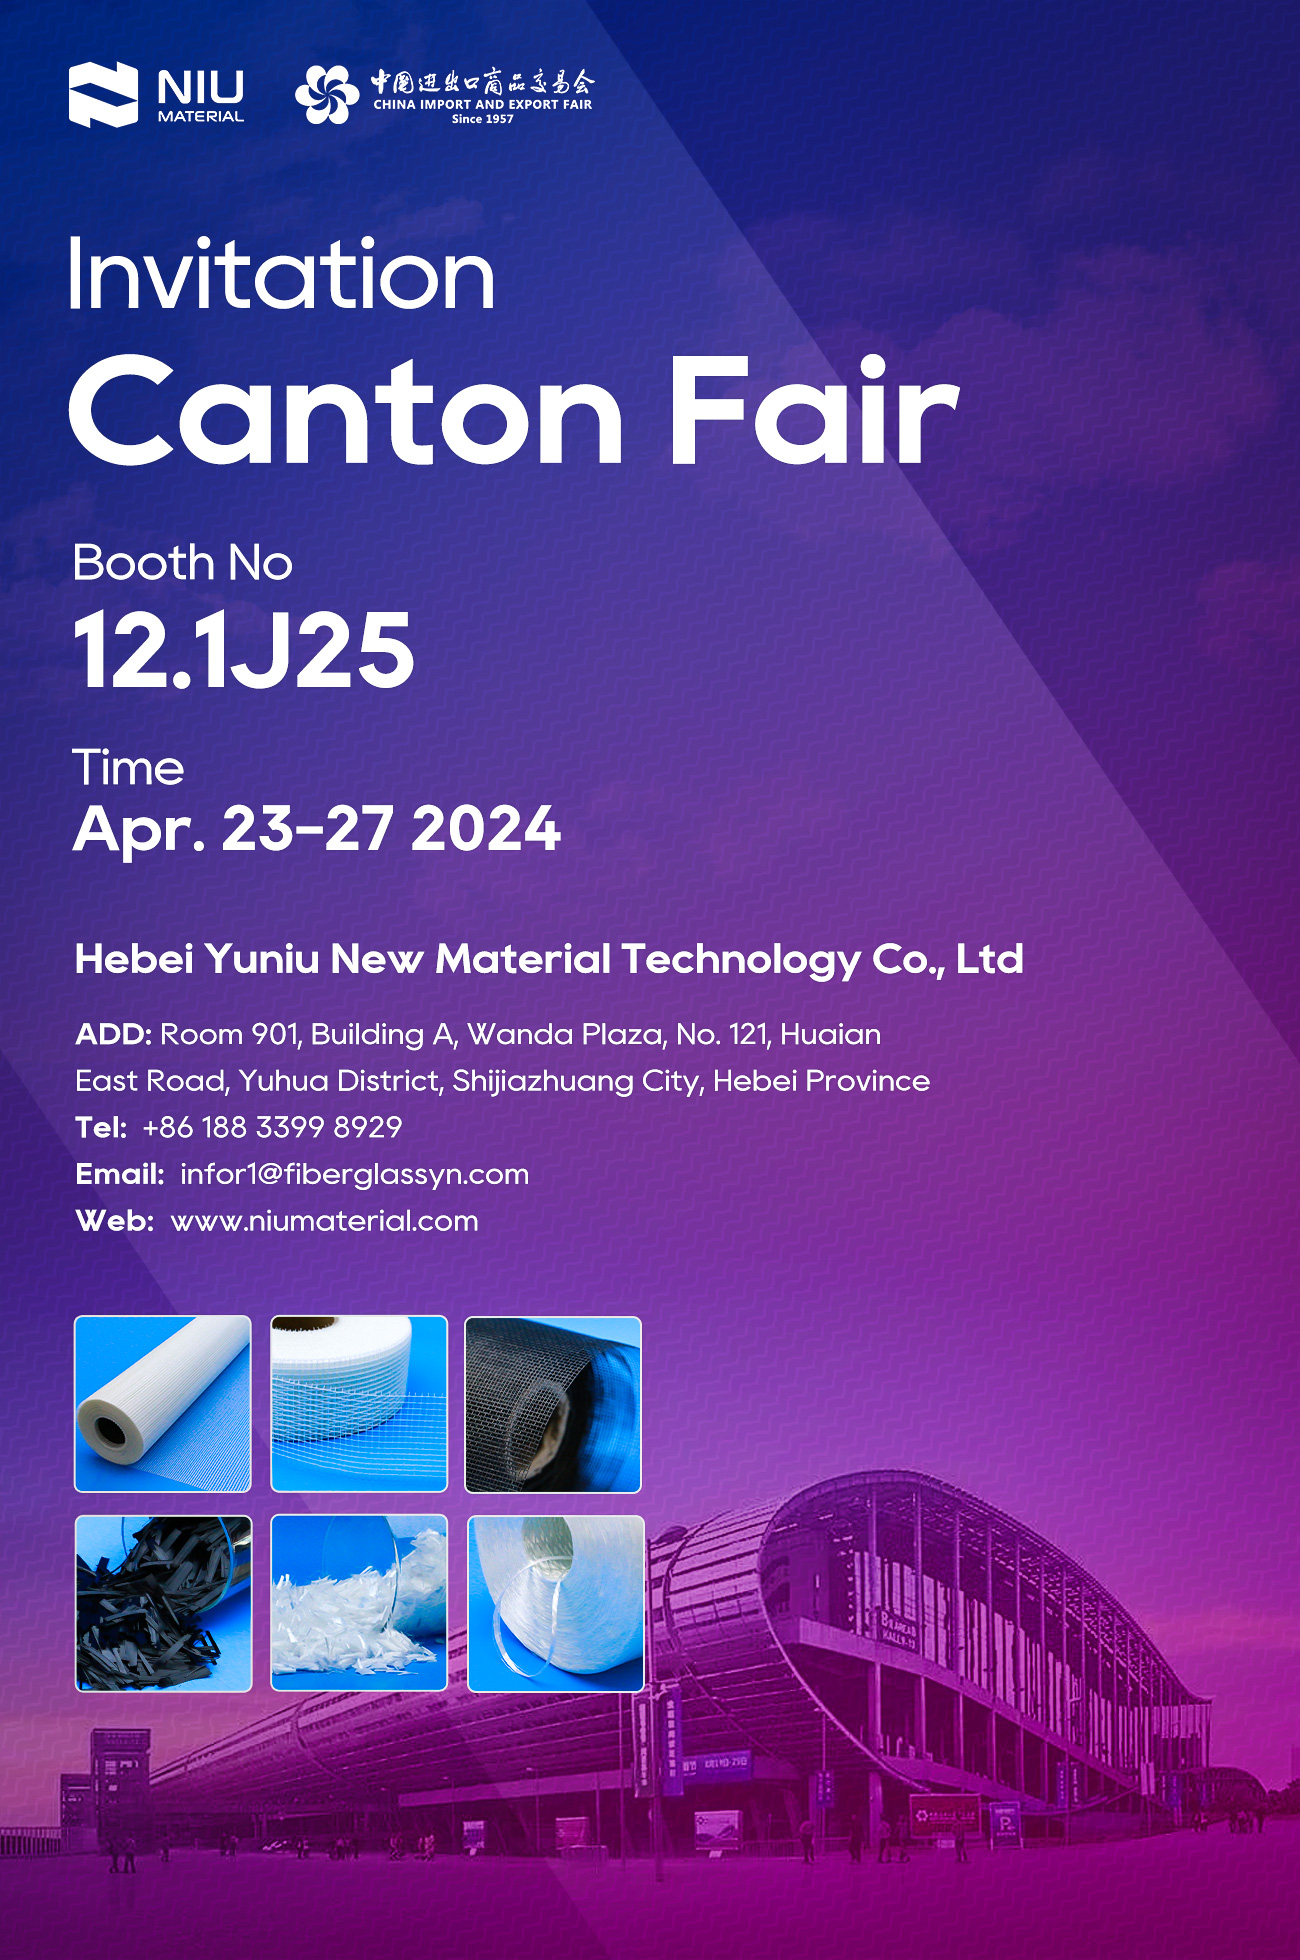 Invitation to Visit Our Booth at the Canton Fair - April 23rd to 27th